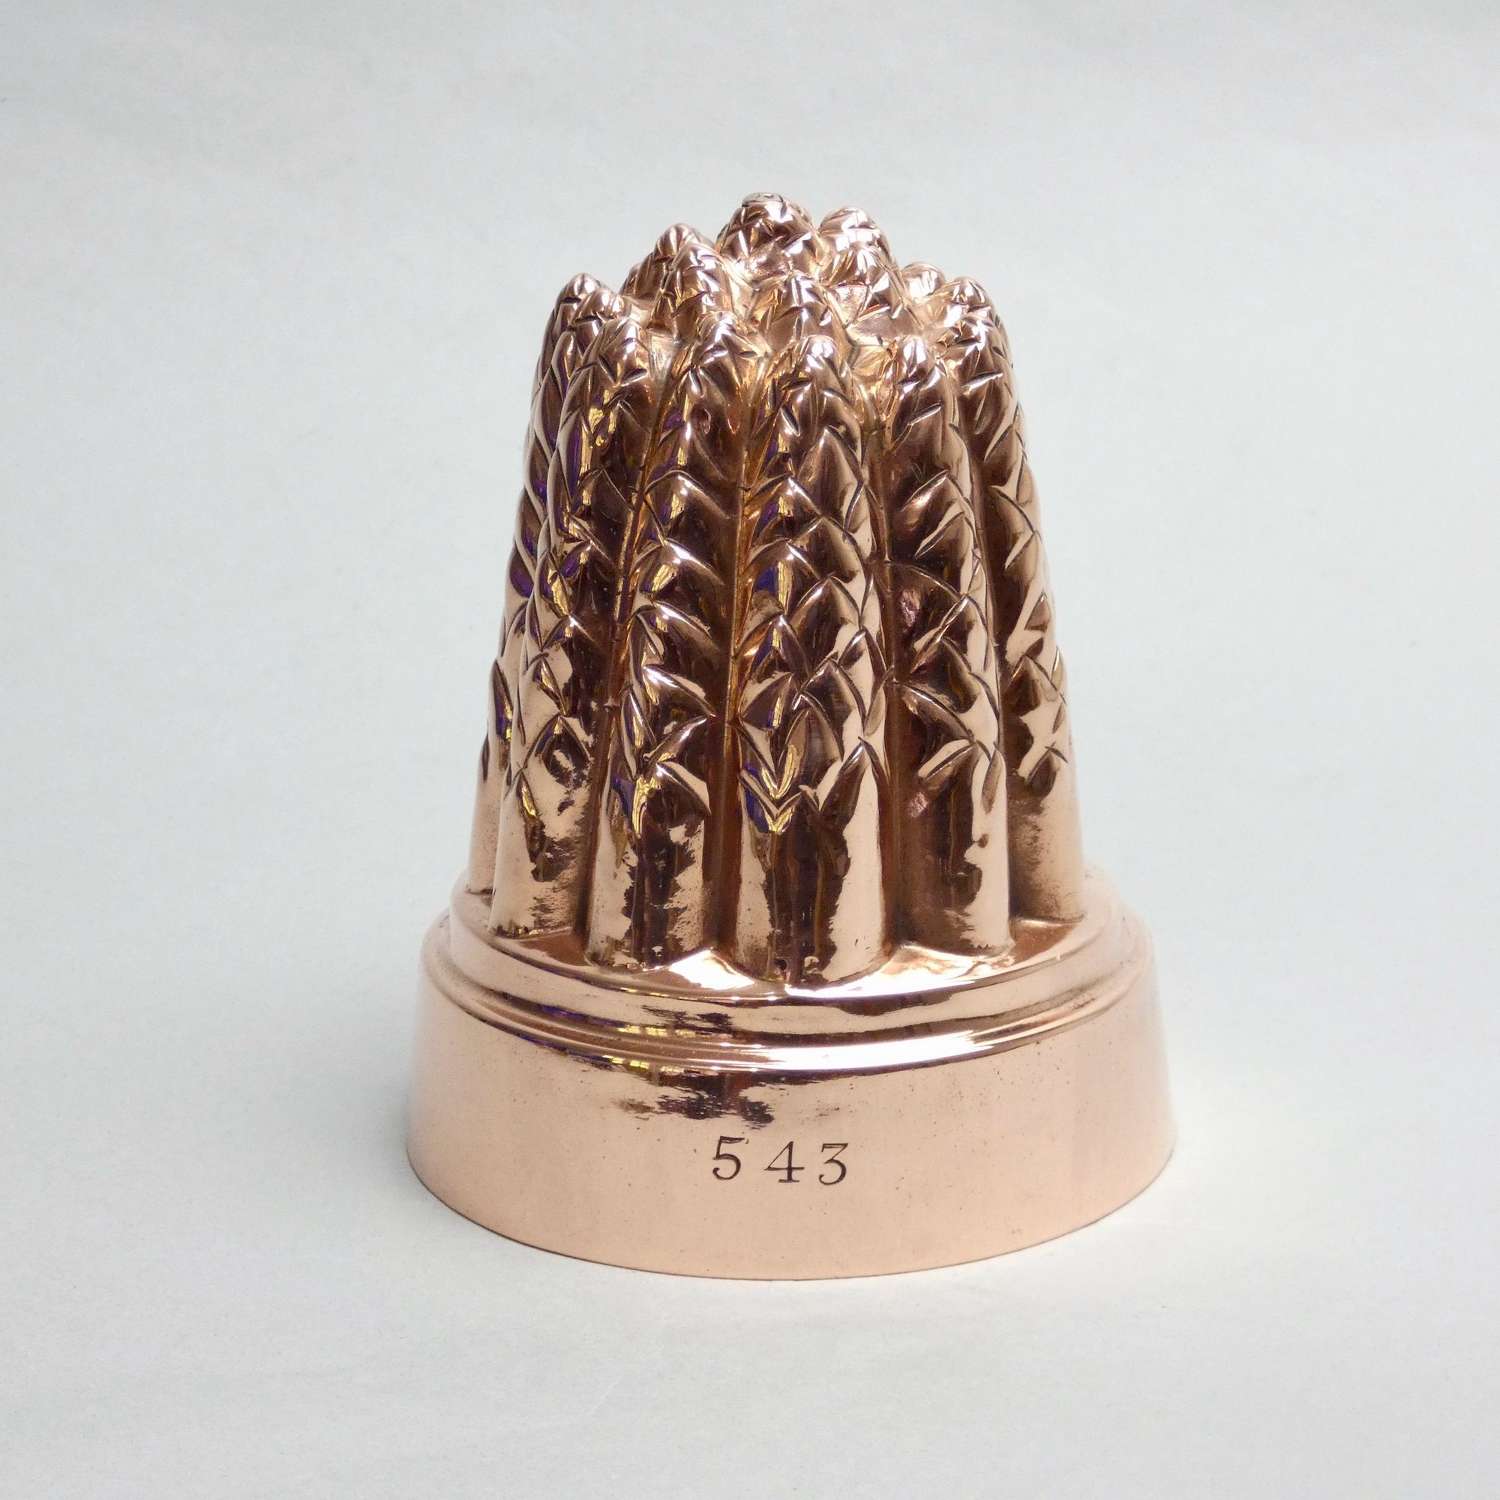 Copper mould in the form of a bunch of asparagus